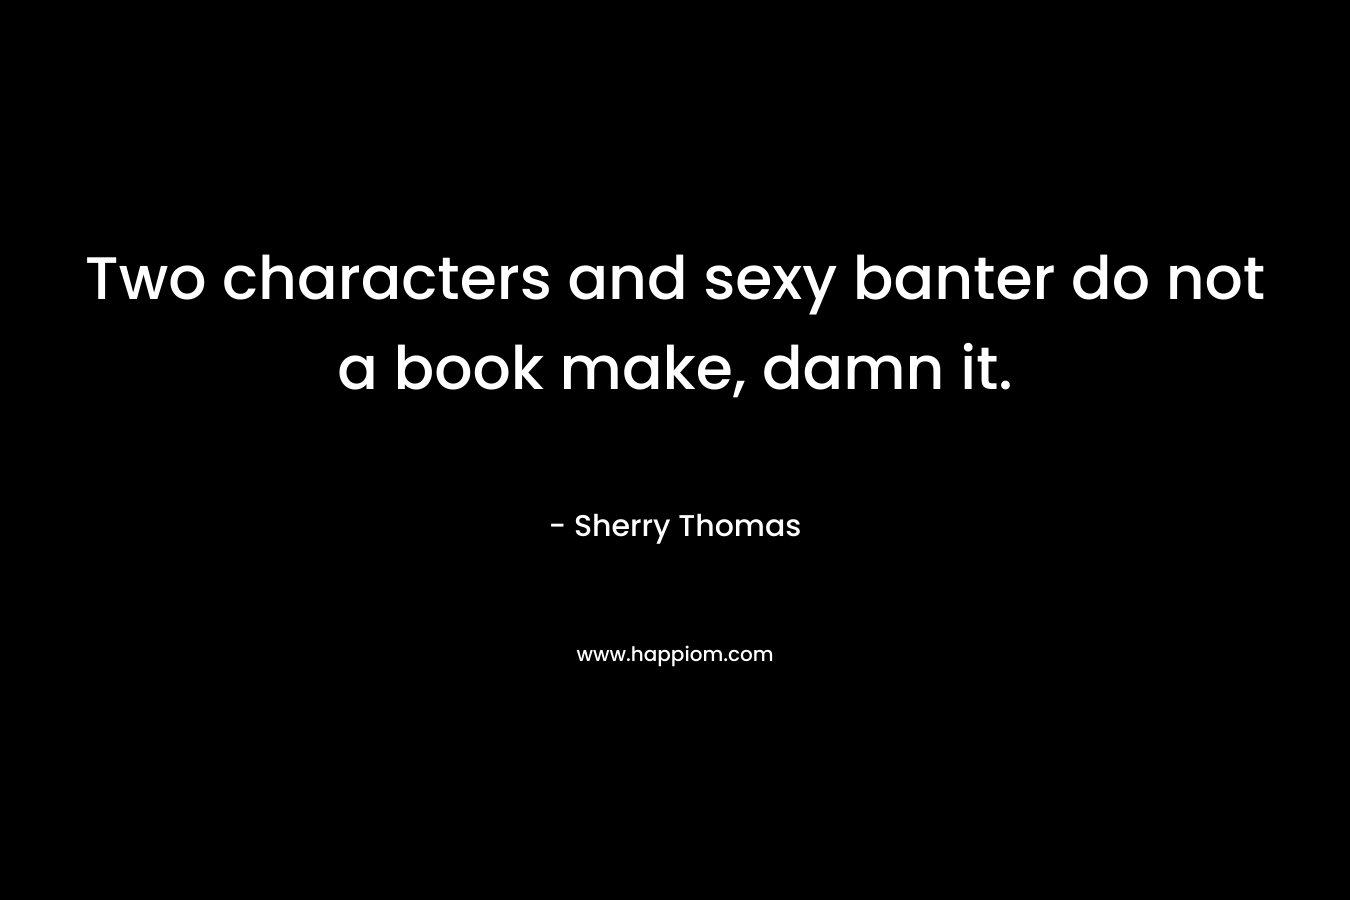 Two characters and sexy banter do not a book make, damn it. – Sherry Thomas